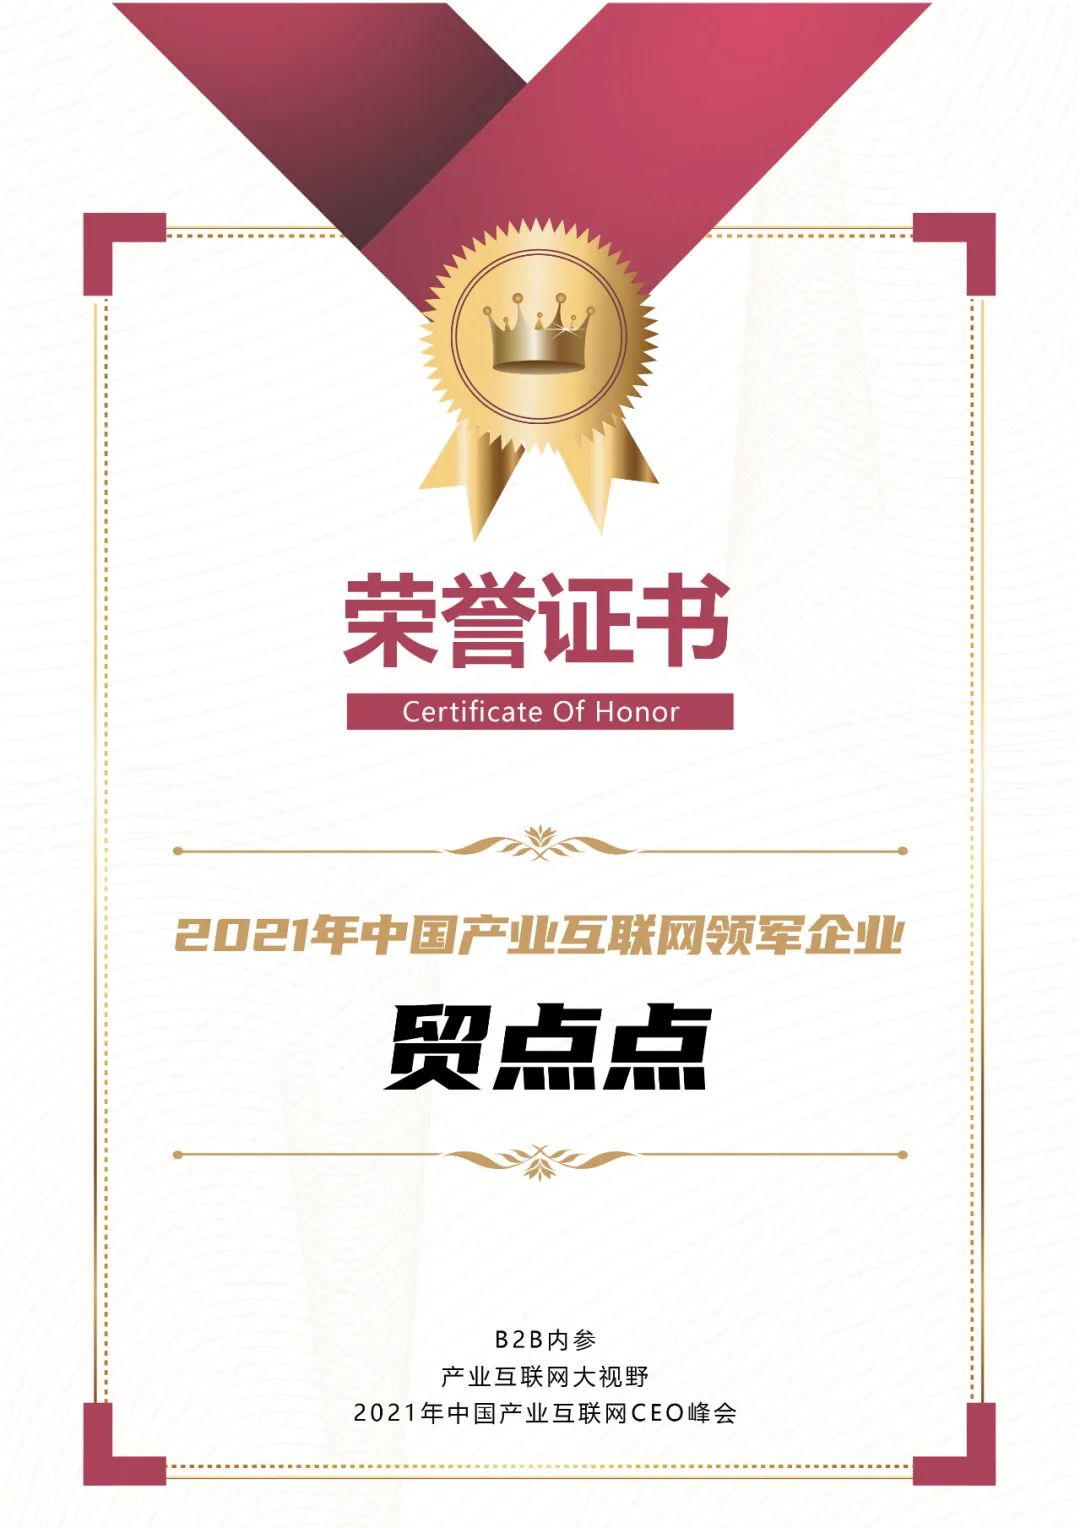 The Founder Chen Liang Was Awarded the Outstanding Ceo of China's Industrial Internet in 2021